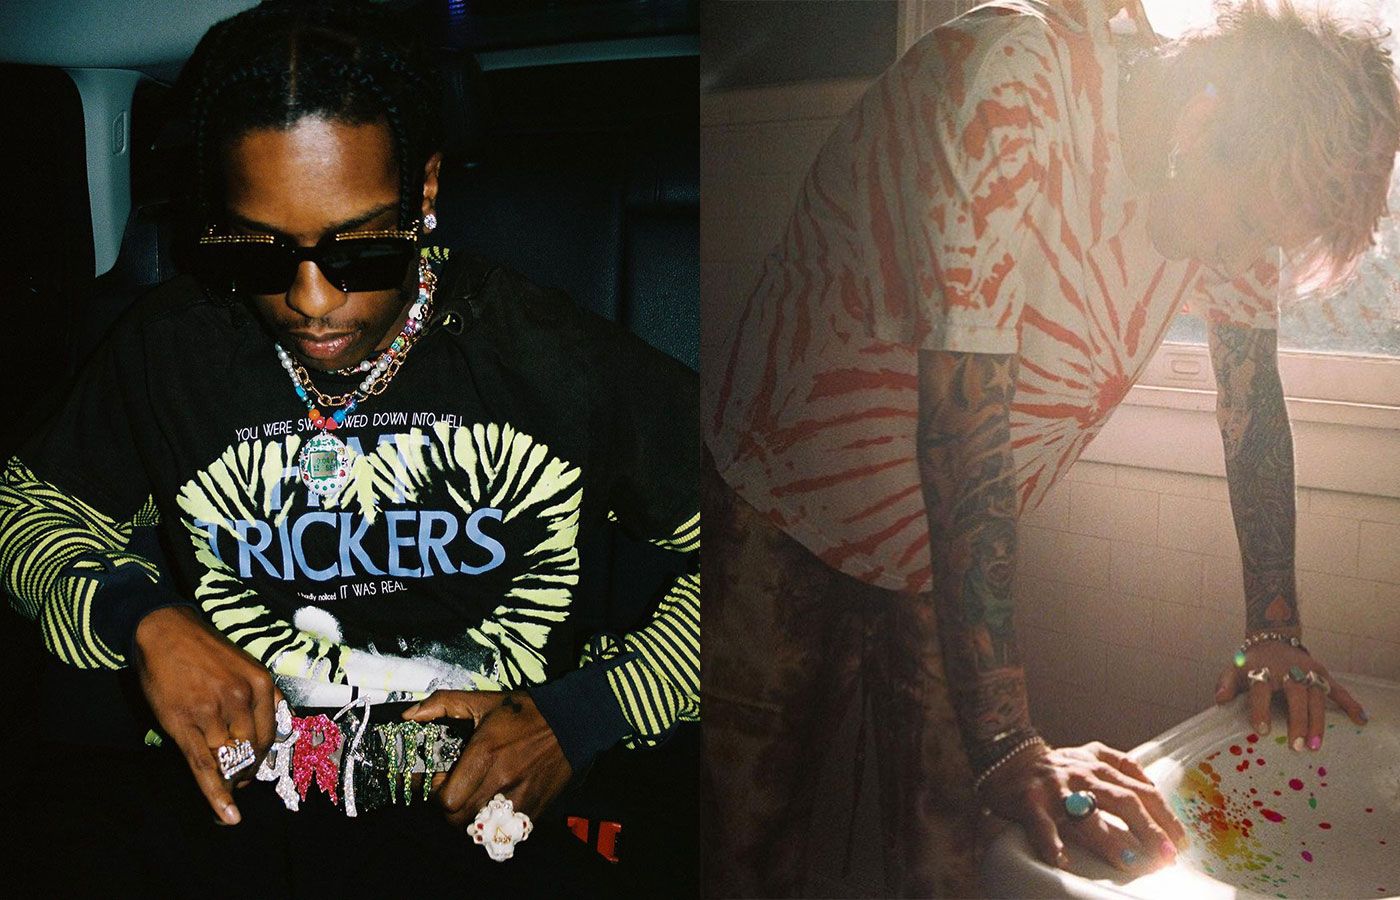 Musicians A$AP Rocky and Machine Gun Kelly pushing jewellery to extremes